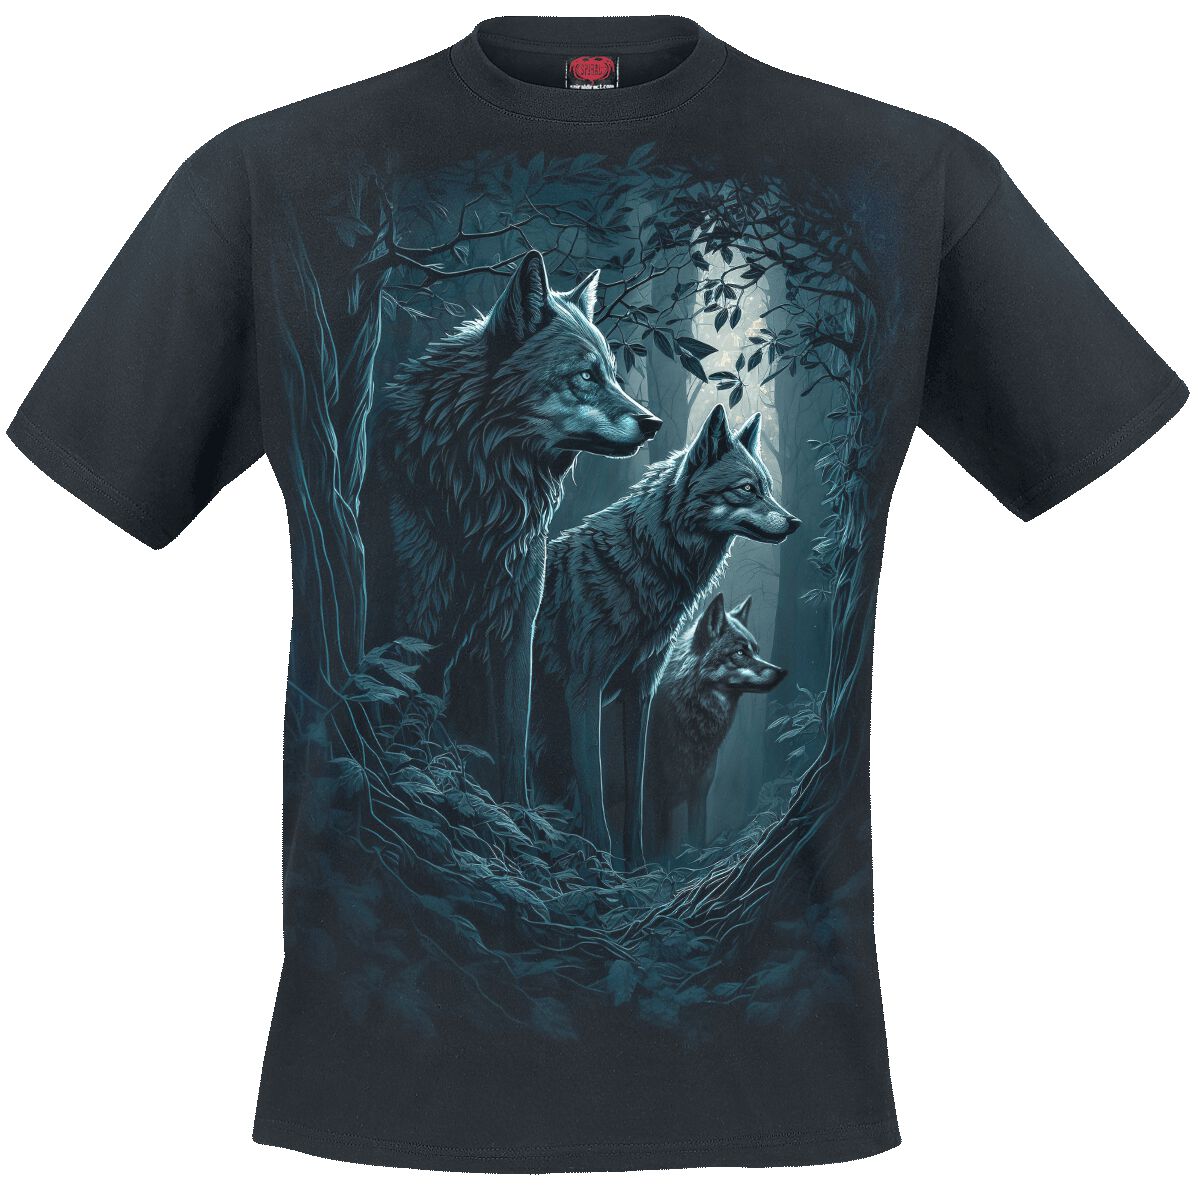 Image of T-Shirt di Spiral - Forest Guardians - M a 4XL - Uomo - nero